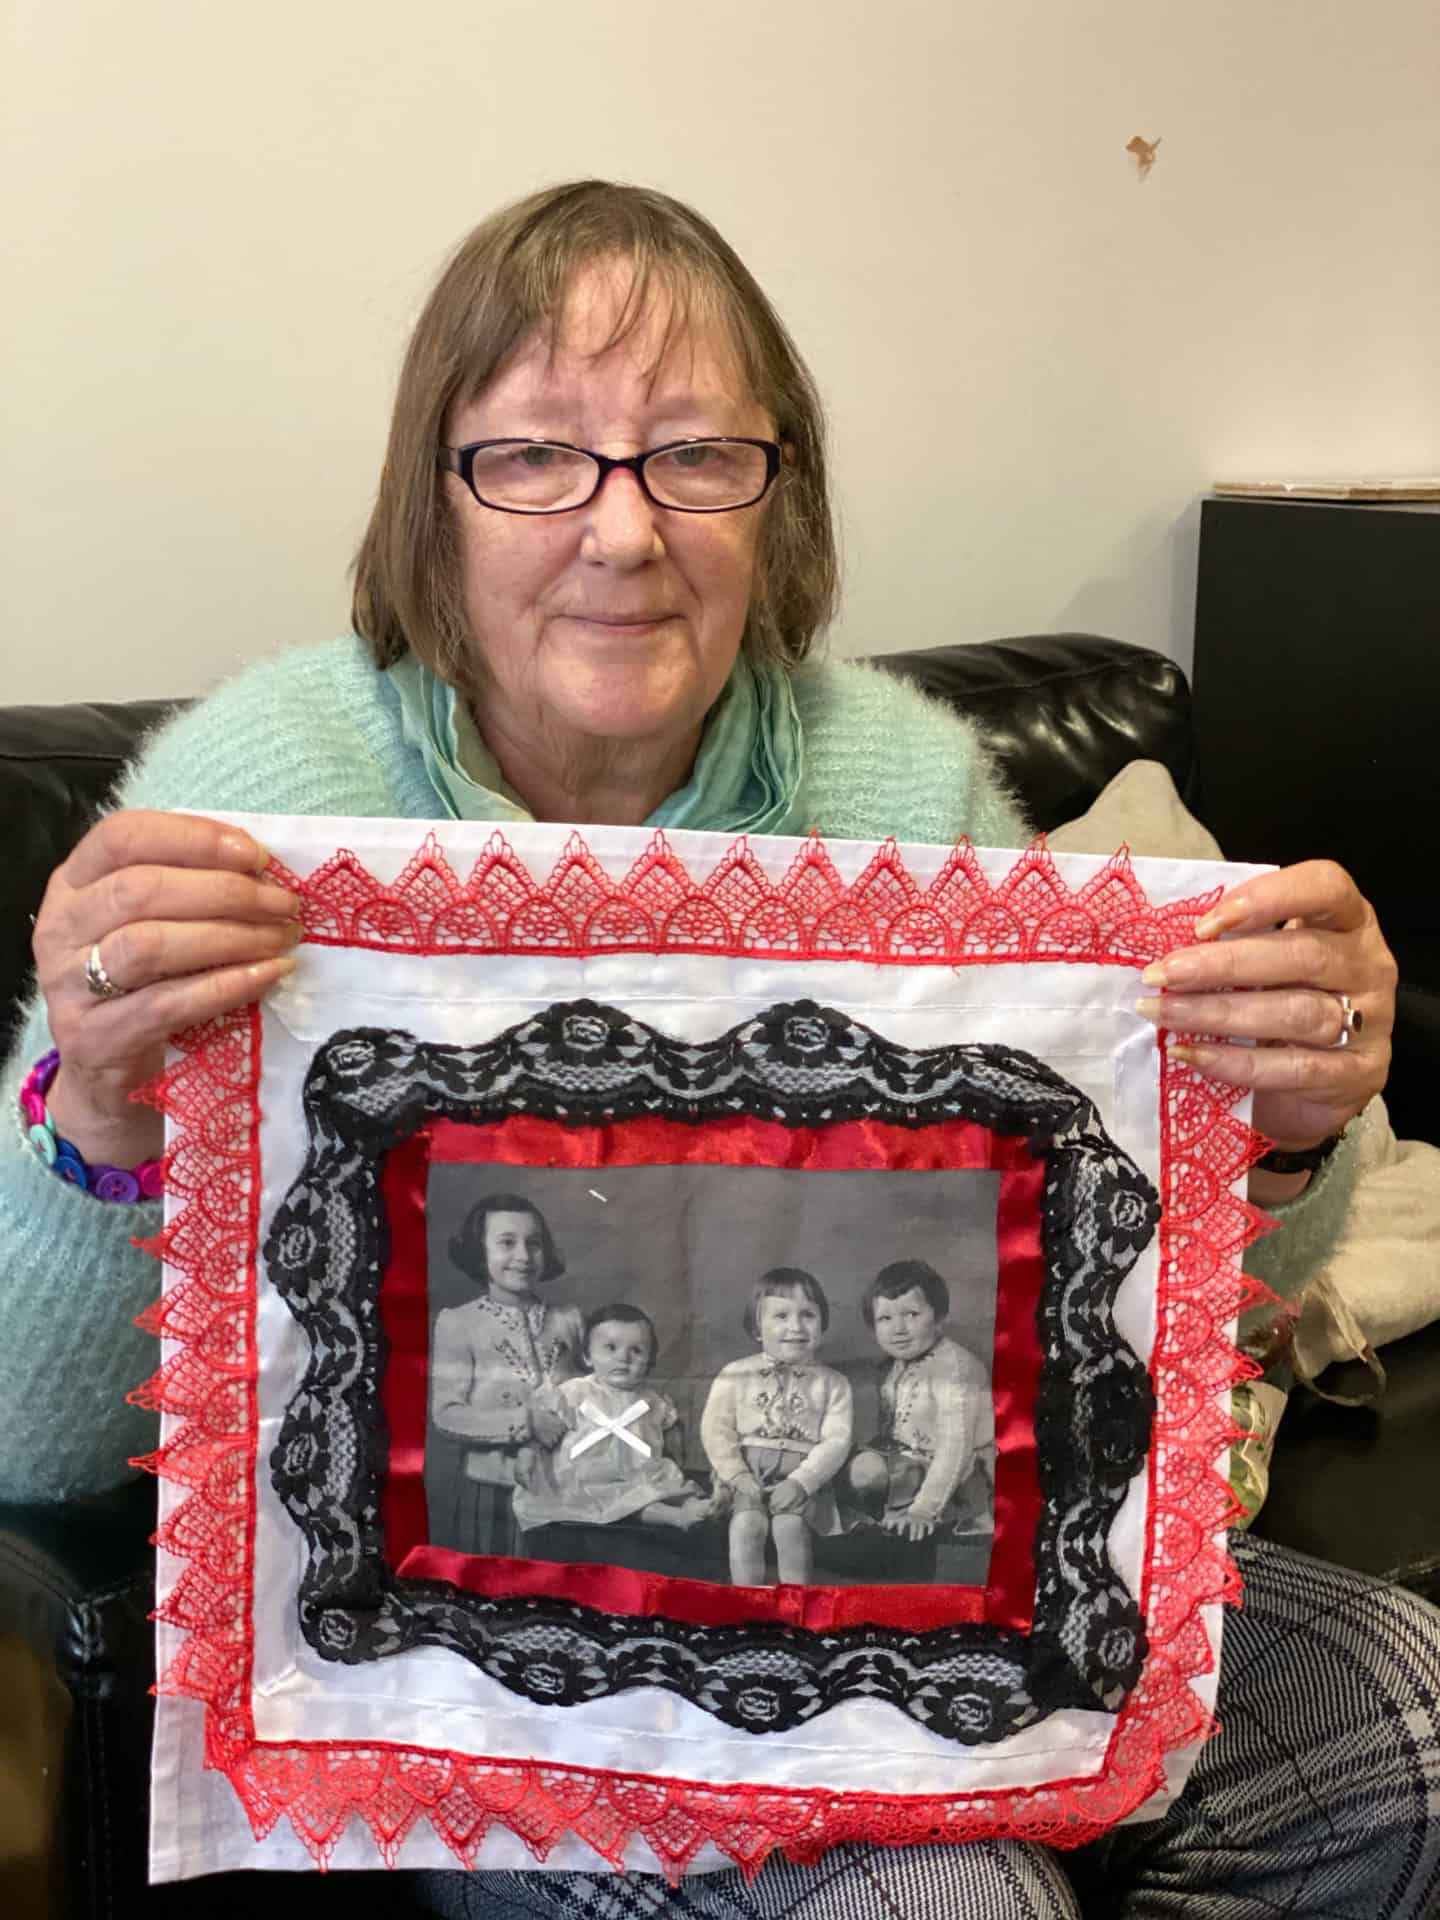 Barbara with her finished embroidery Sisters at Gather café Dudley 2020